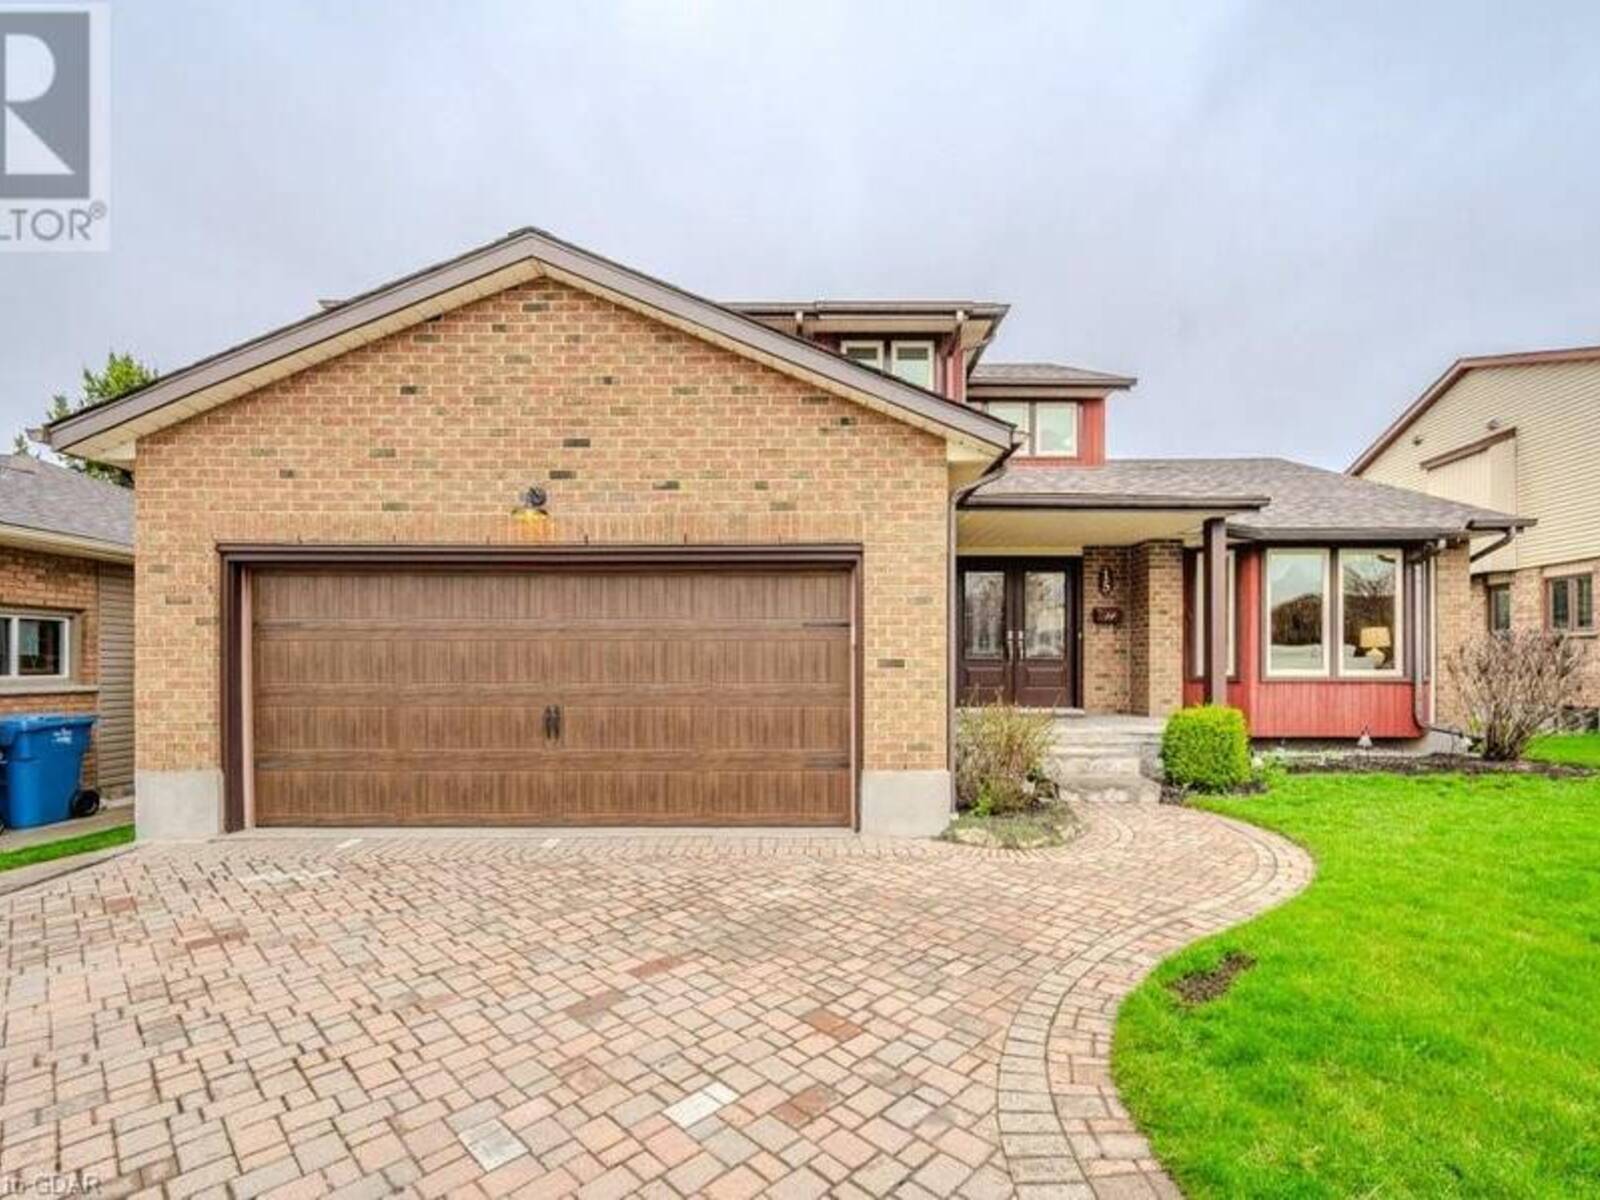 15 WILTSHIRE Place, Guelph, Ontario N1H 8B1